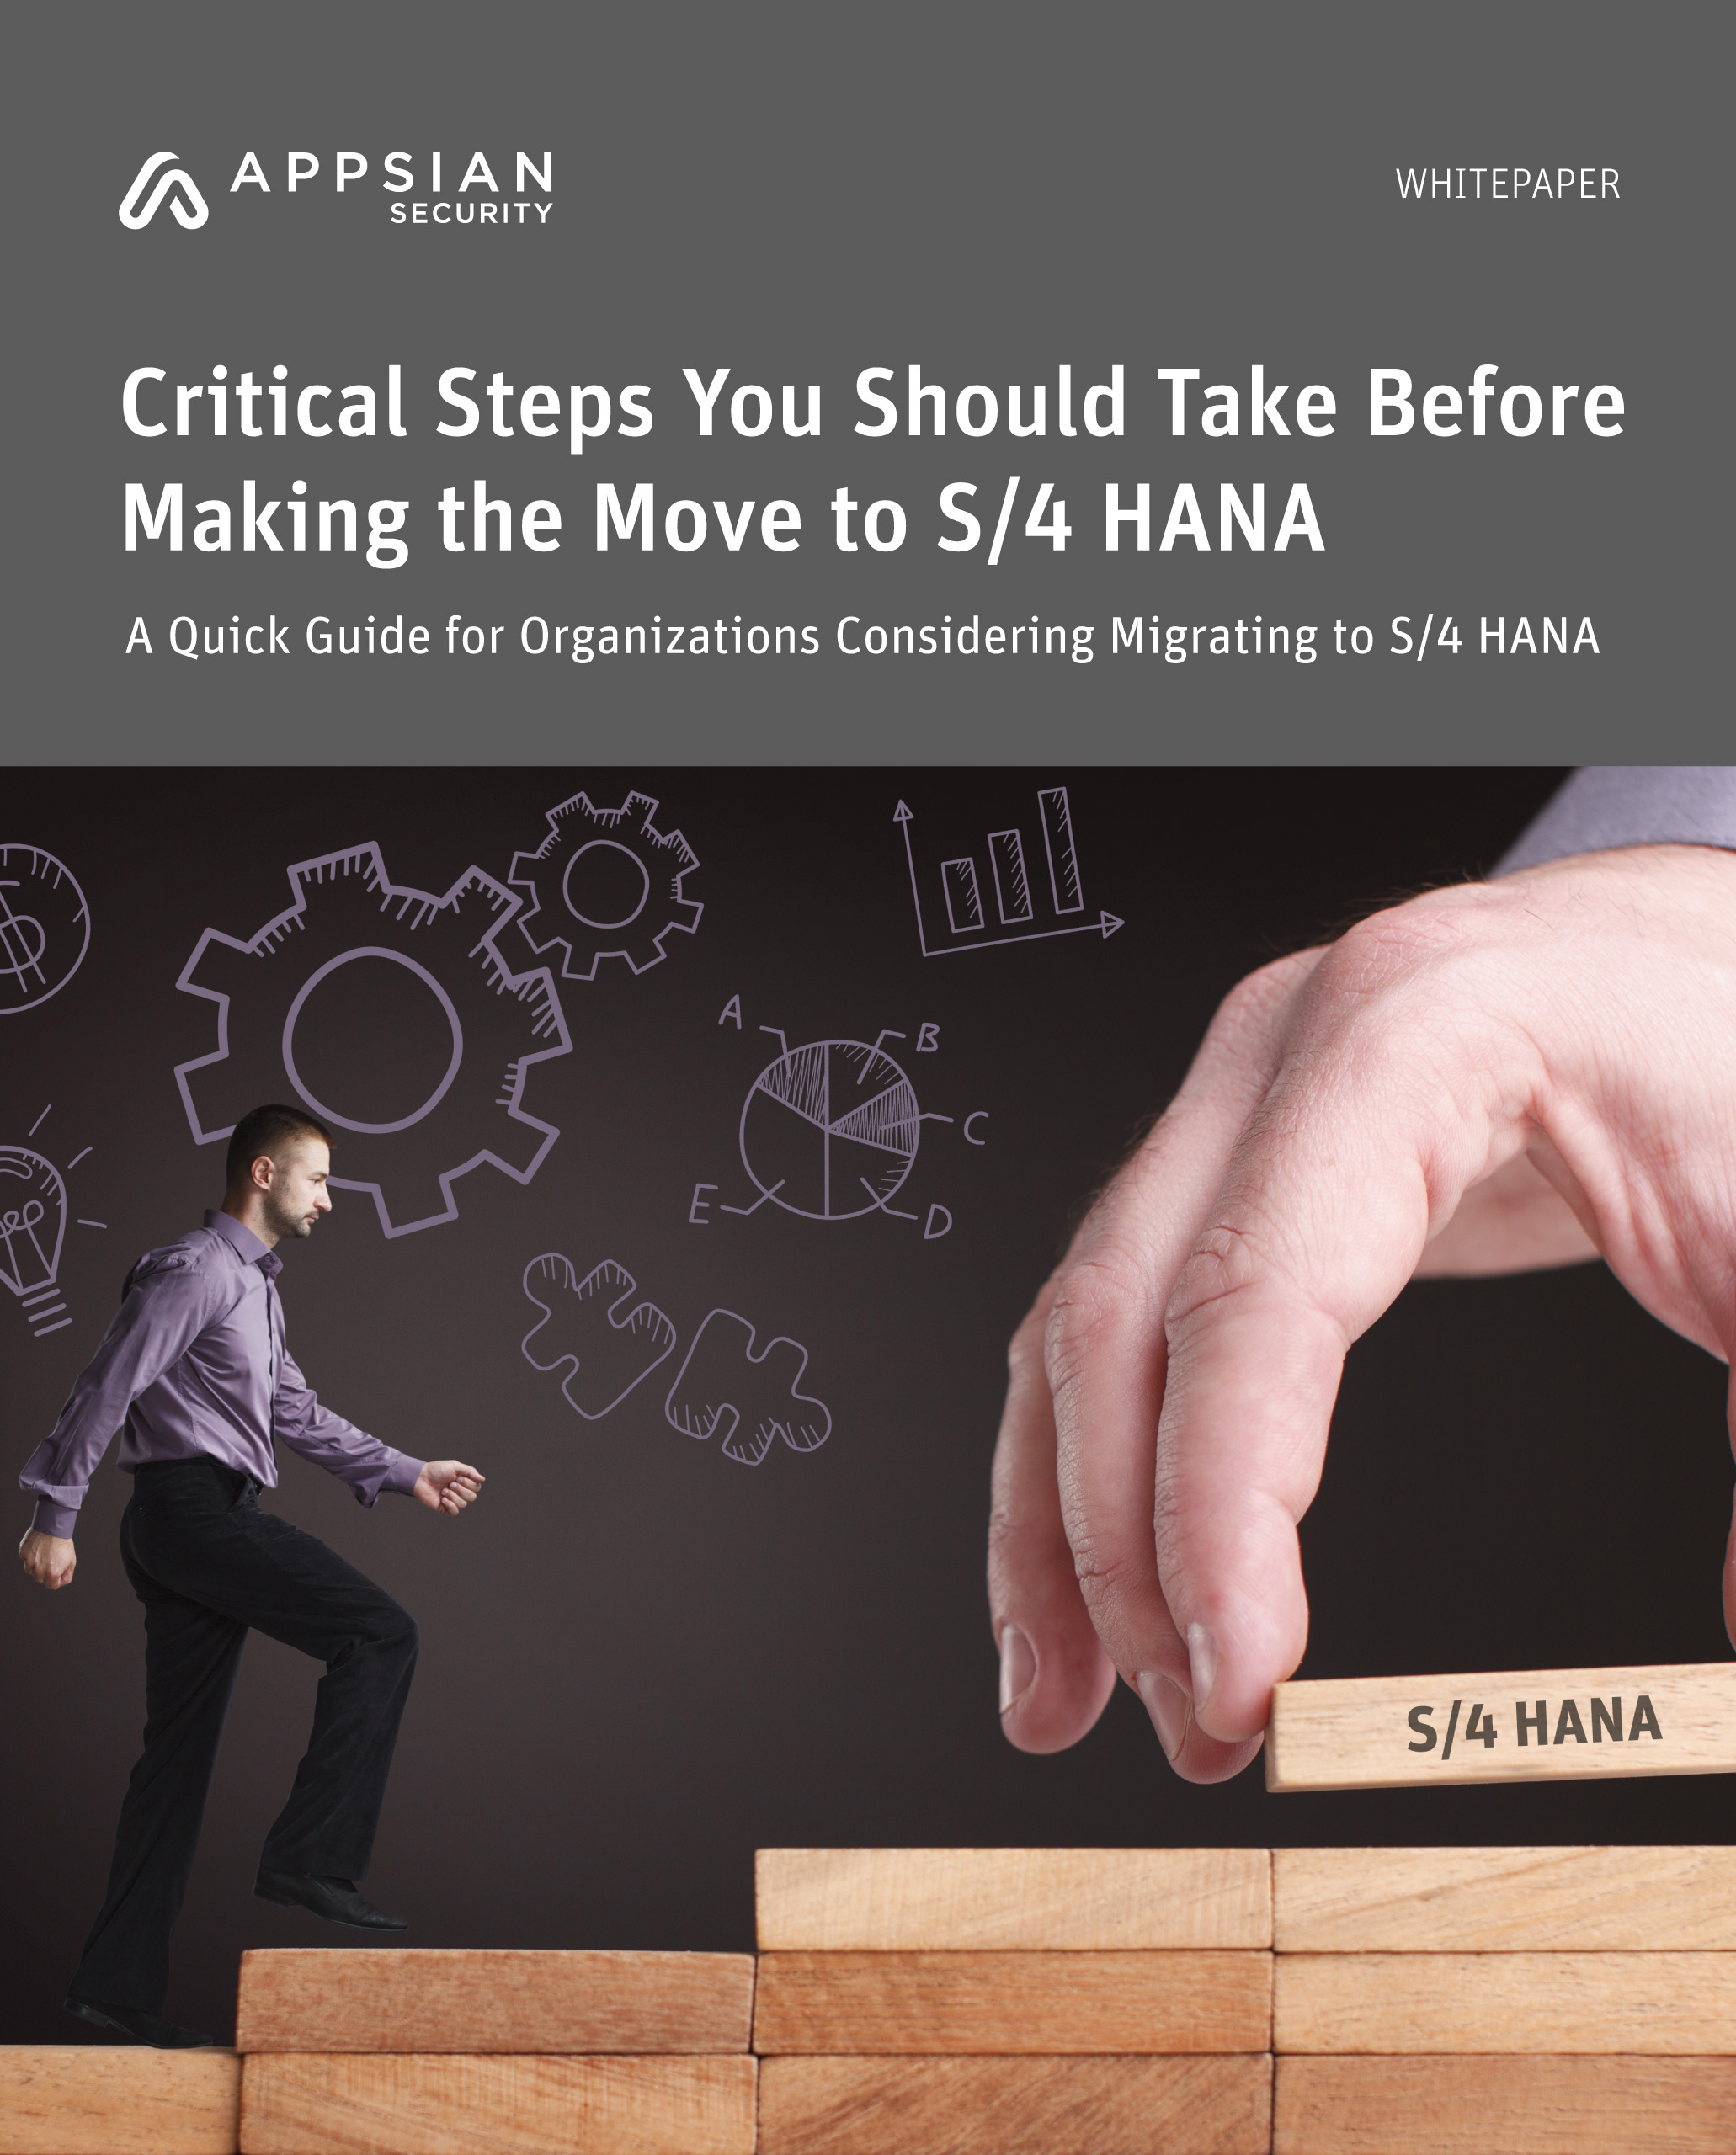 Critical Steps You Should Take Before Making the Move to S/4 HANA